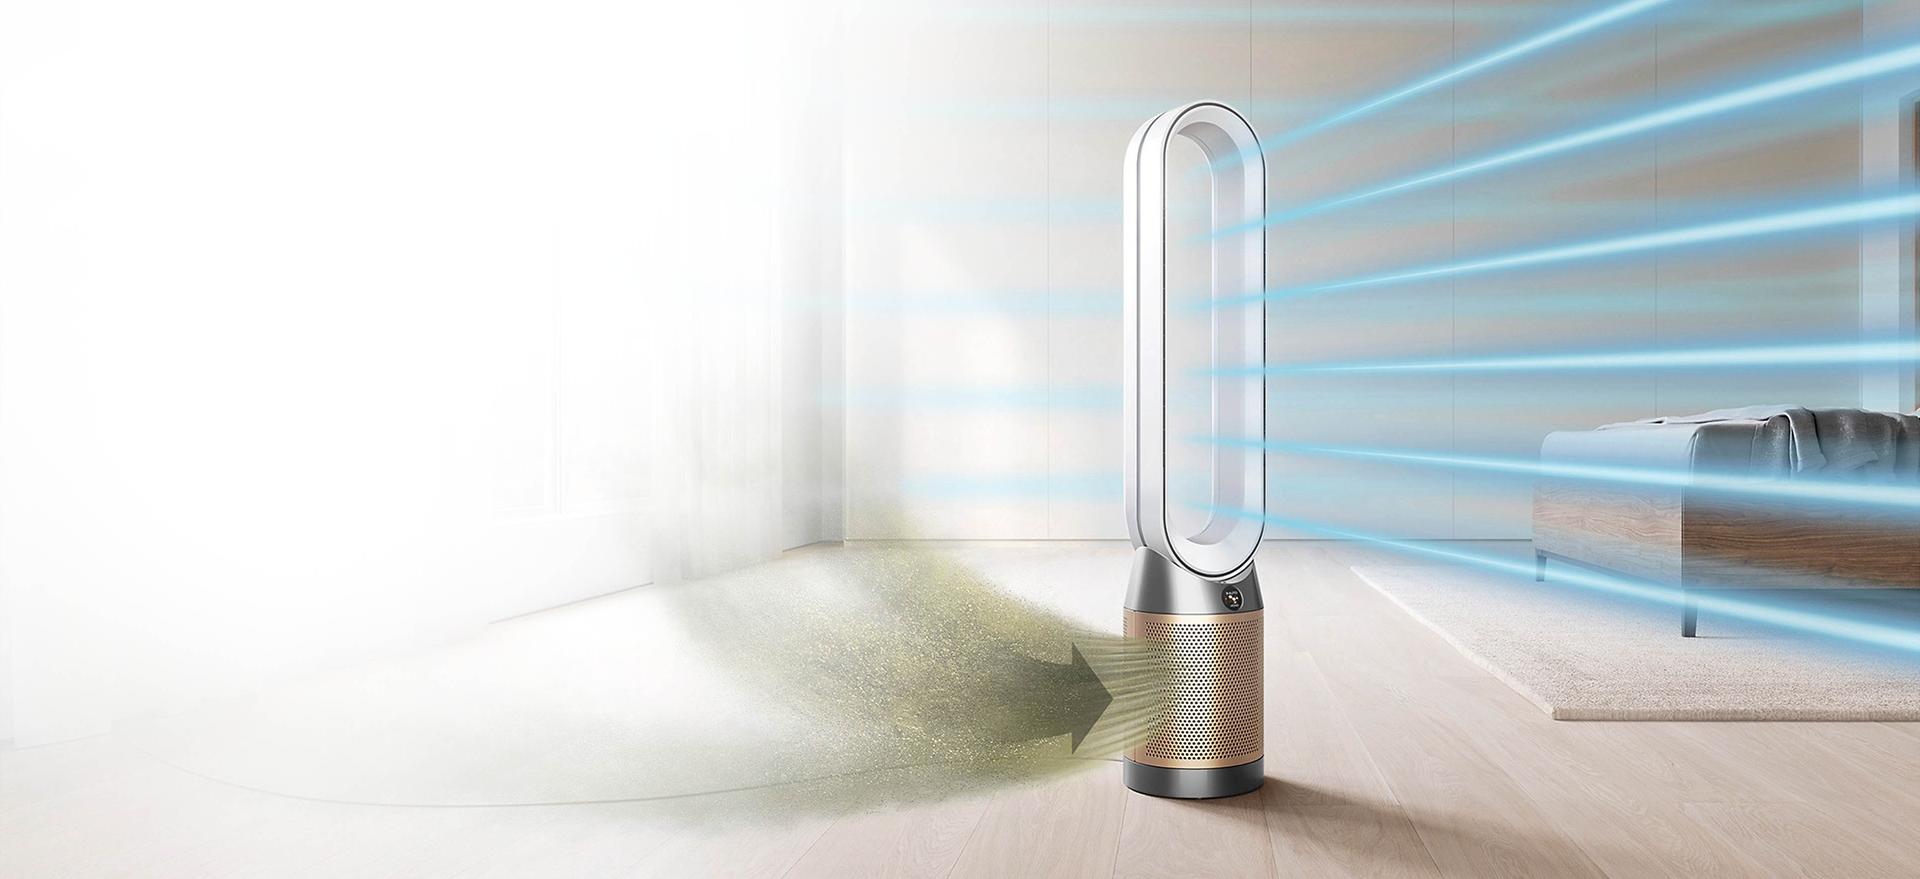 The Dyson Purifier Cool Formaldehyde purifying a living area.